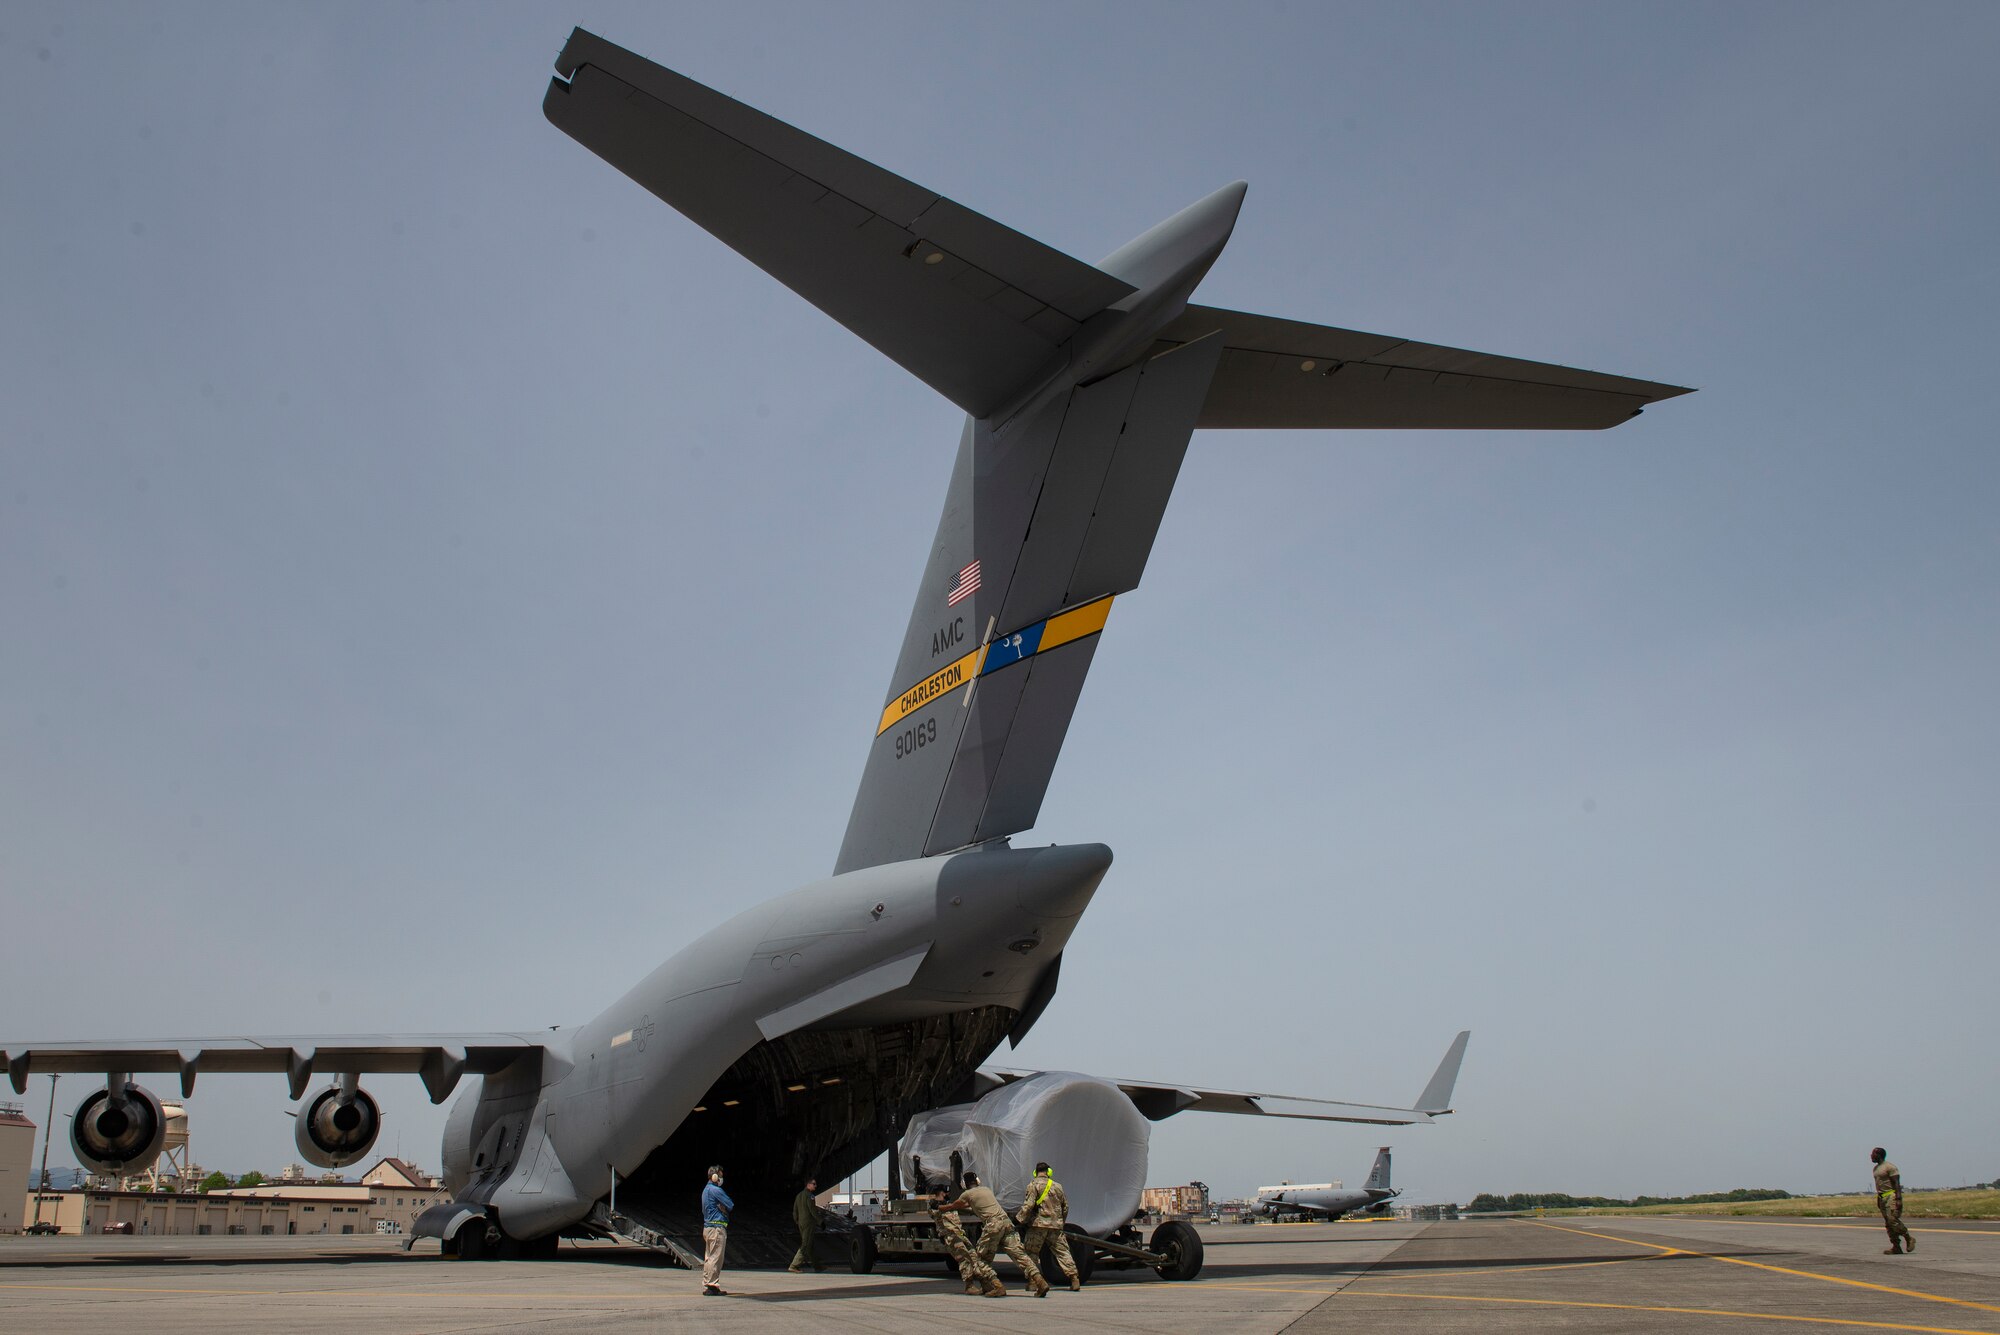 Airmen assigned to the 730th Air Mobility Squadron load a C-17 engine onto a C-17 Globemaster III, May, 4, 2021, at Yokota Air Base, Japan. The 730th AMS gave the engine to Kadena Air Base Airmen assigned to the 733rd AMS to enhance their training program, allowing maintainers to sharpen their skills on a real asset without the chance of damaging an operational aircraft. Finding ways to improve training helps increase the readiness and resilience of our force and ensures Pacific Air Forces’ ability to fight and win if needed.